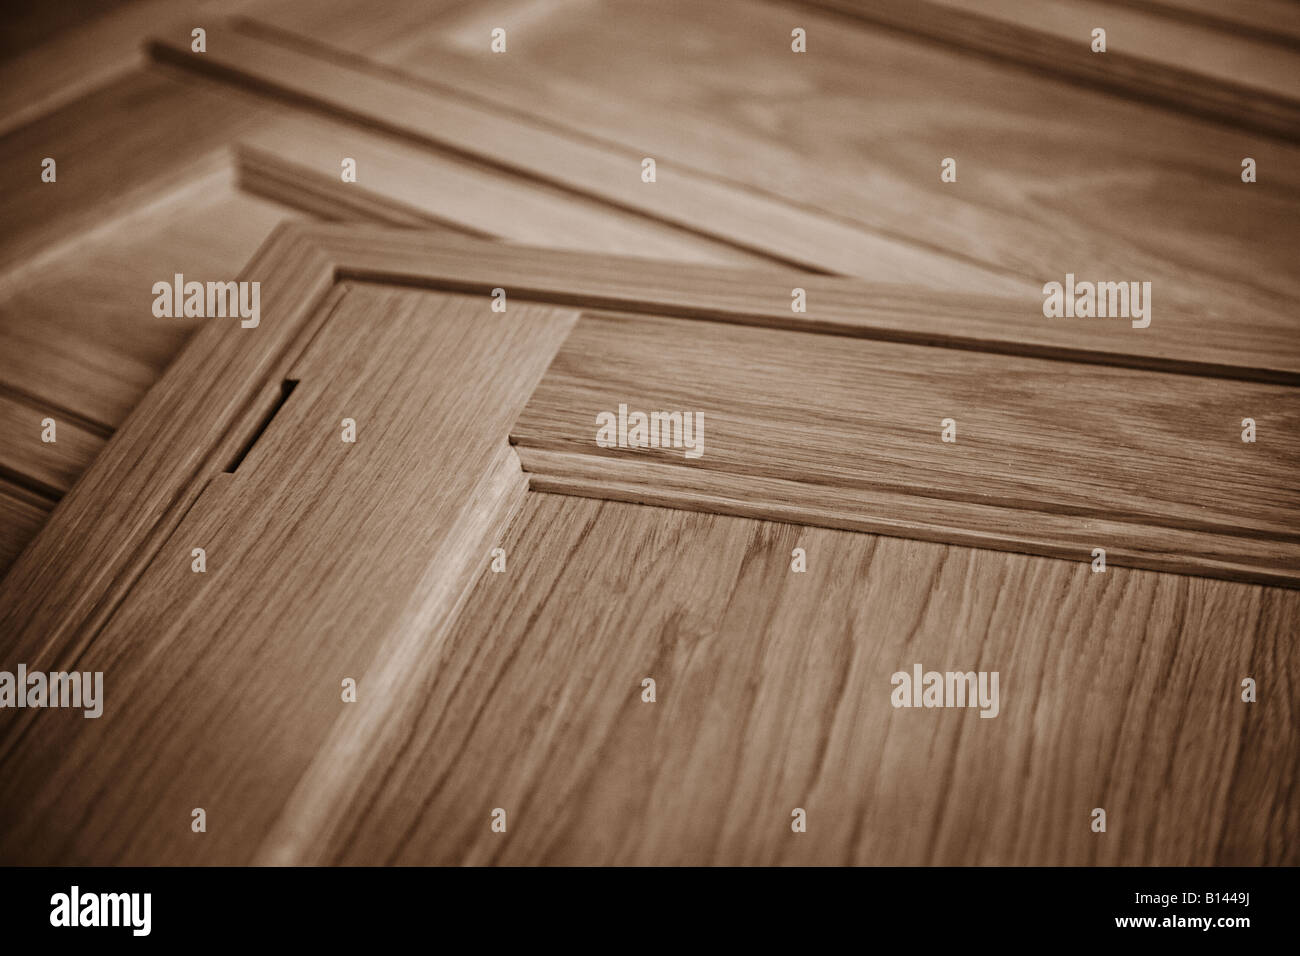 Close up of quality wooden panelling Stock Photo